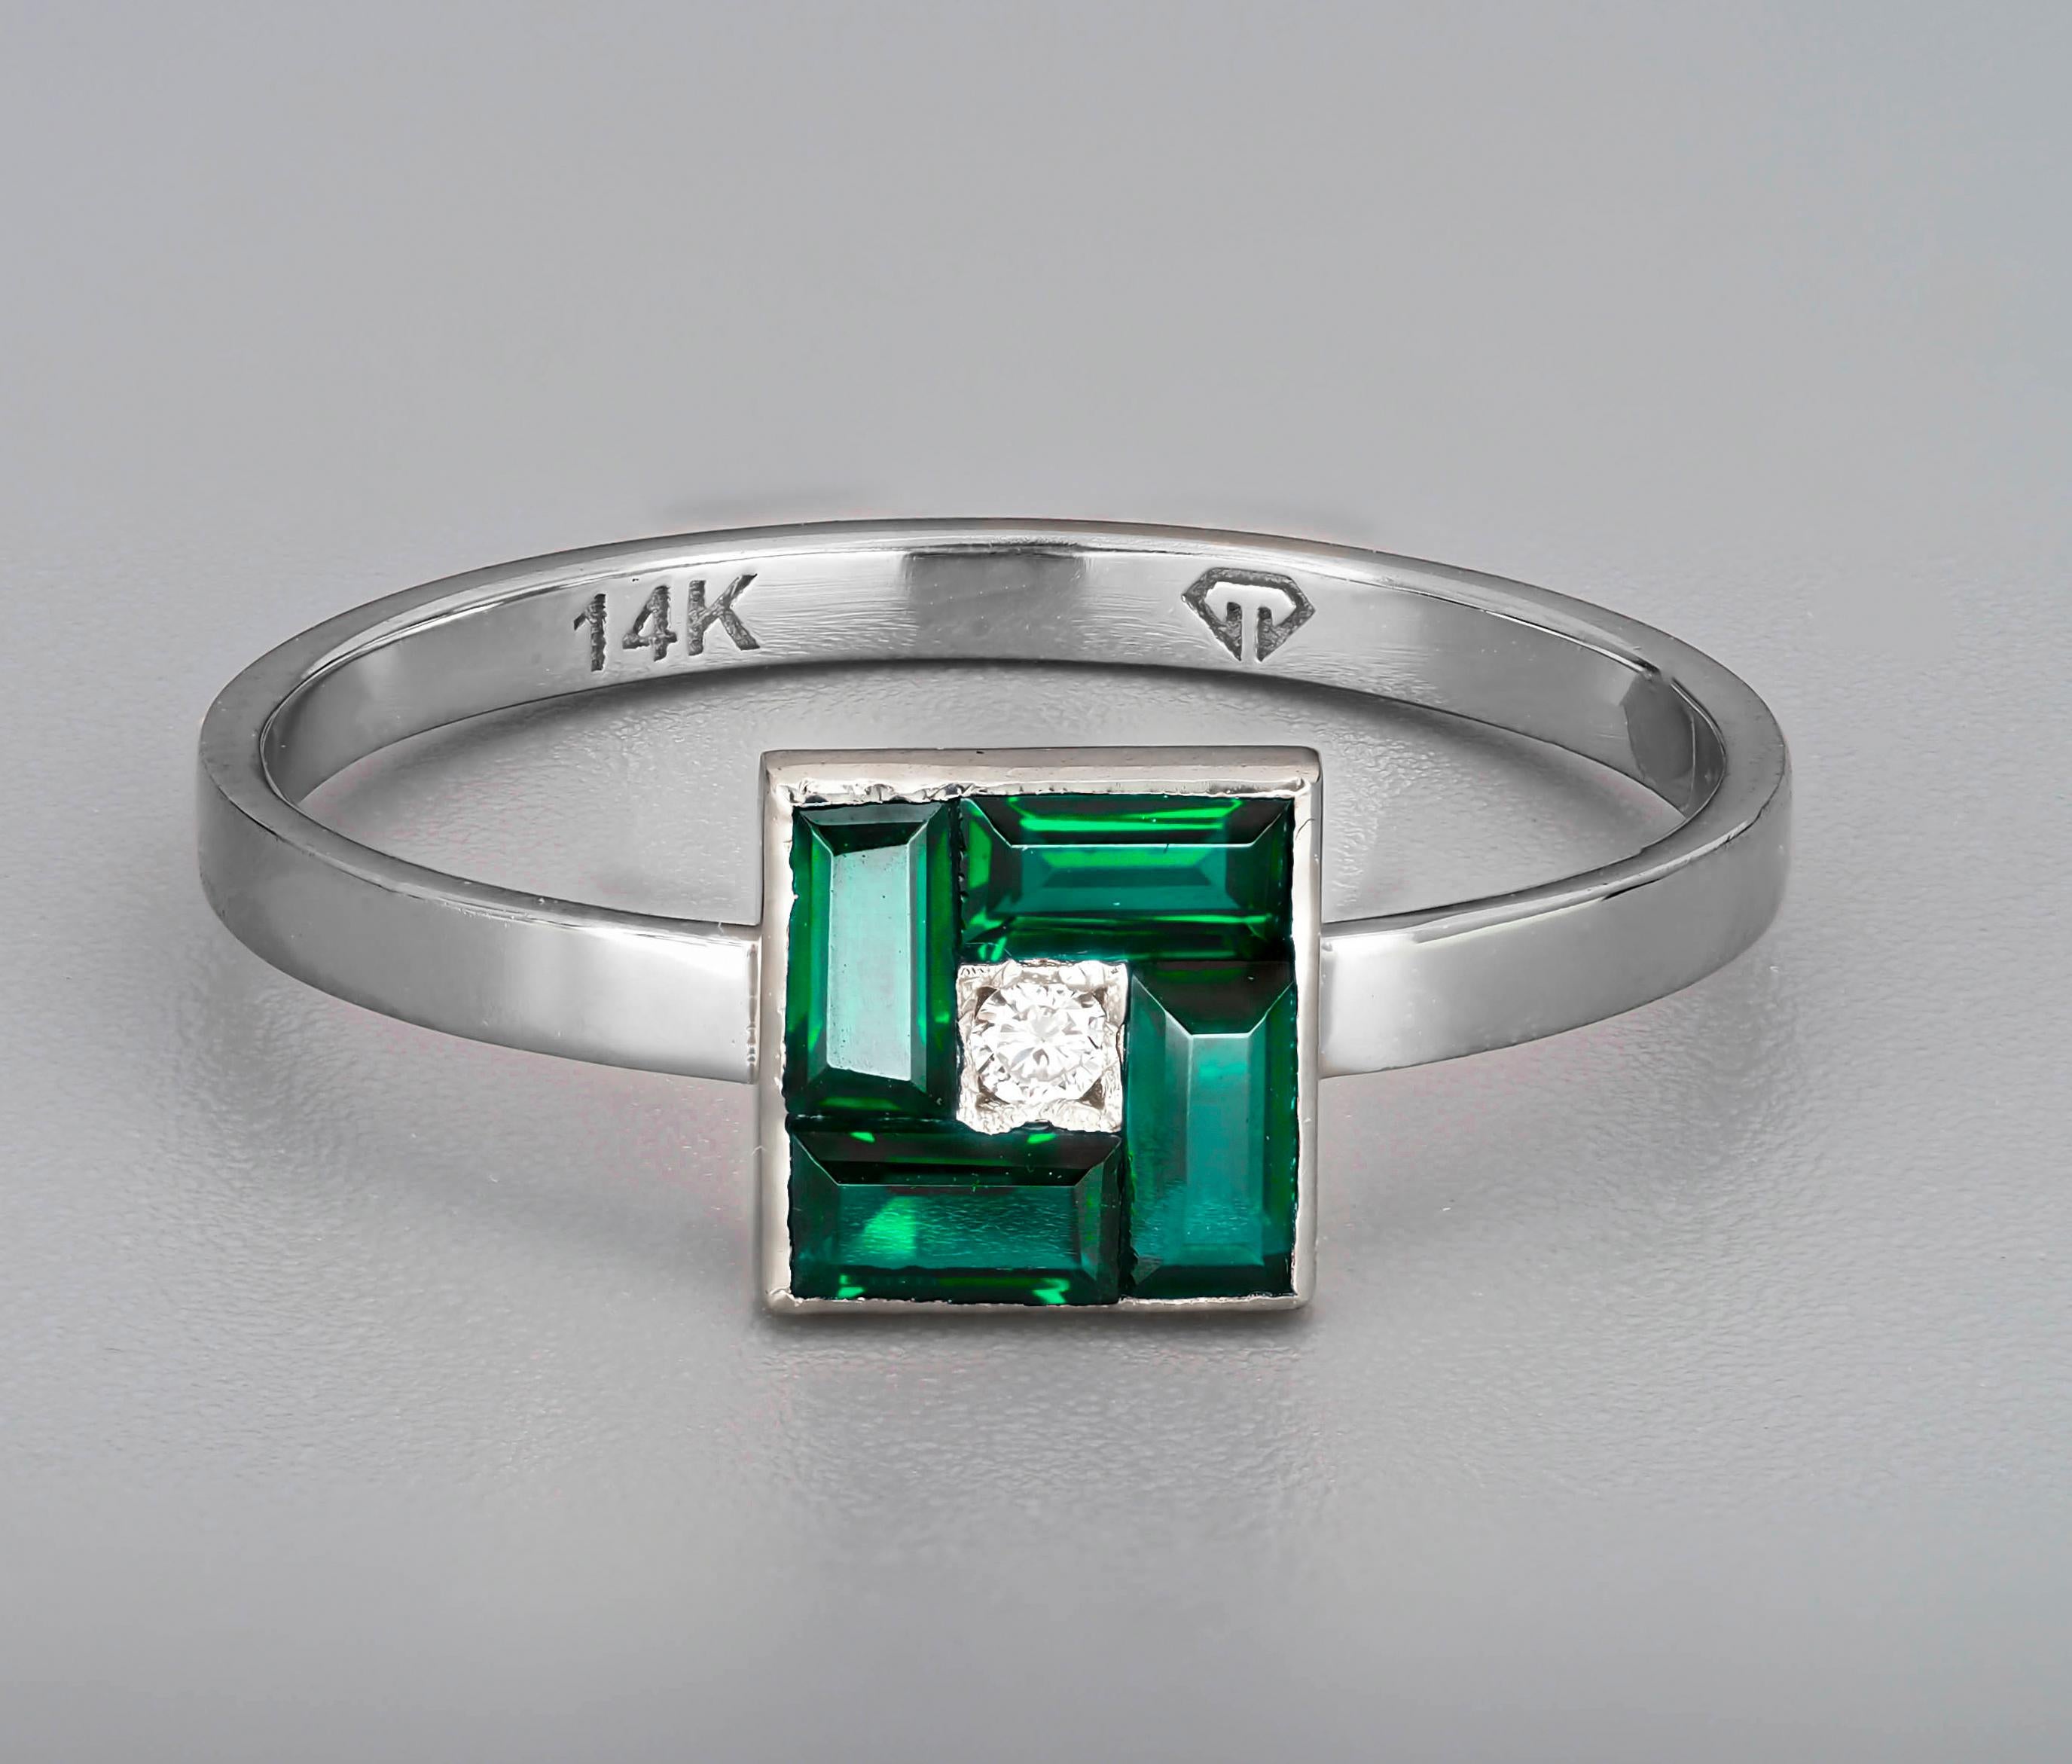 Green baguette 14k gold ring.
Baguette lab emerald 14k gold ring. Delicate emerald ring. Green gem ring. May birthstone ring. Minimalist gold ring. Square gold ring.

Metal: 14k gold
Weight: 1.5 gr. depends from size

Gemstones:
1.Lab emerald: green